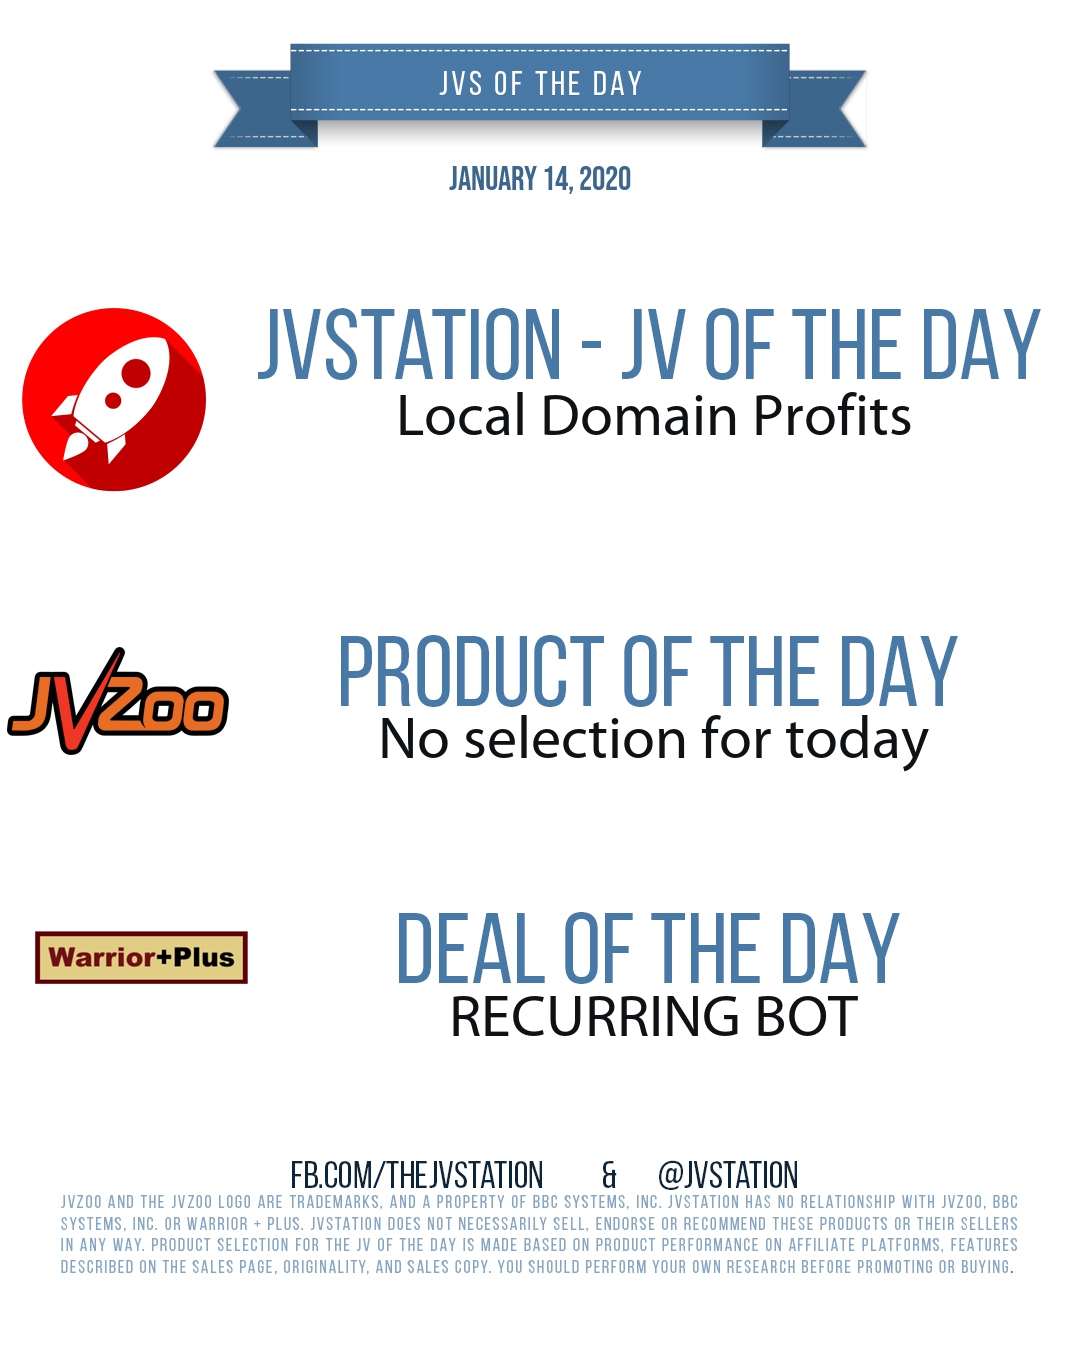 JVs of the day - January 14, 2020